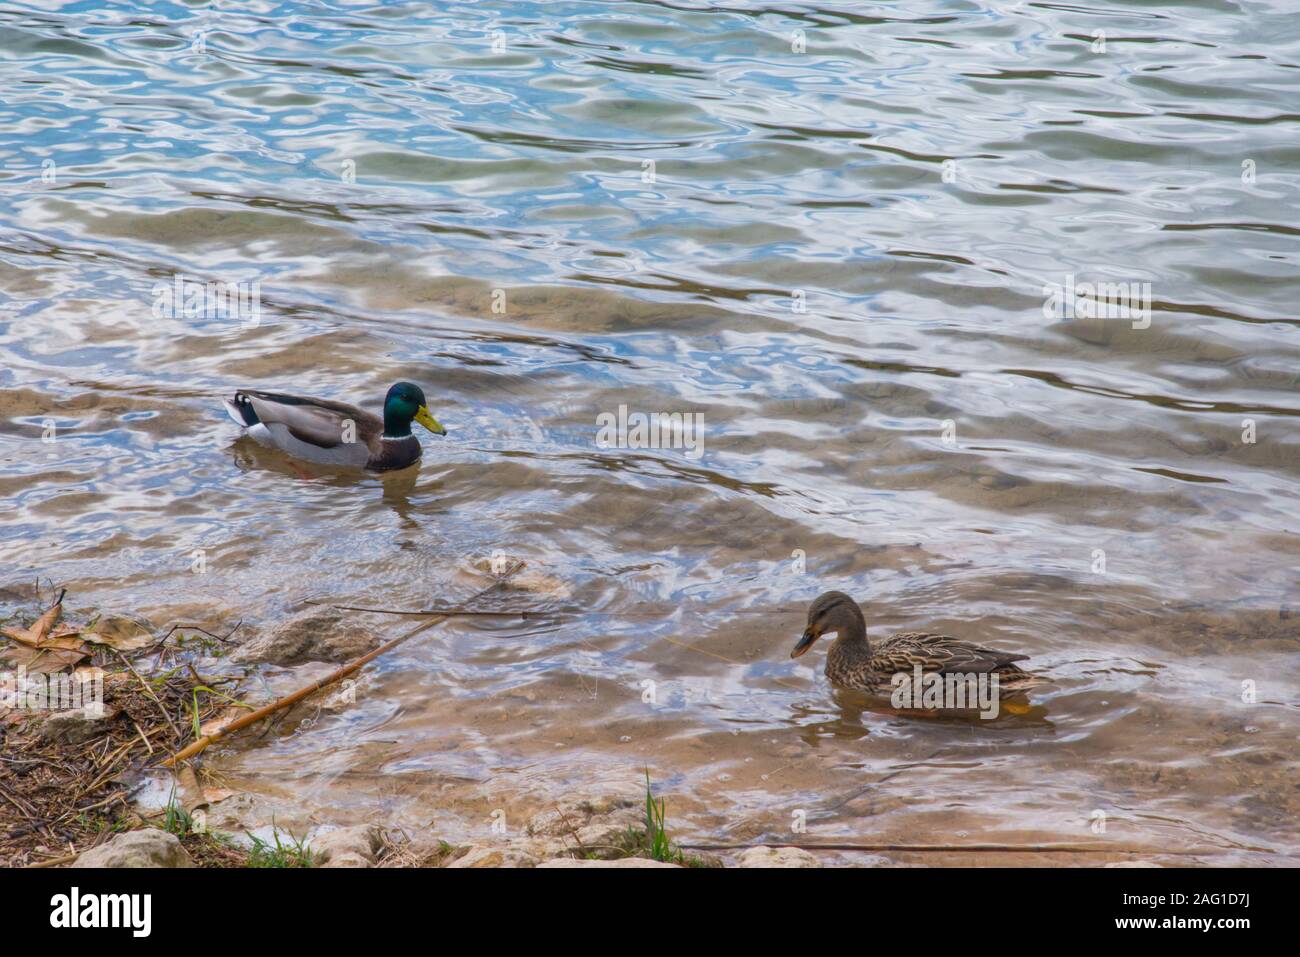 Couple of ducks in a lake. Stock Photo